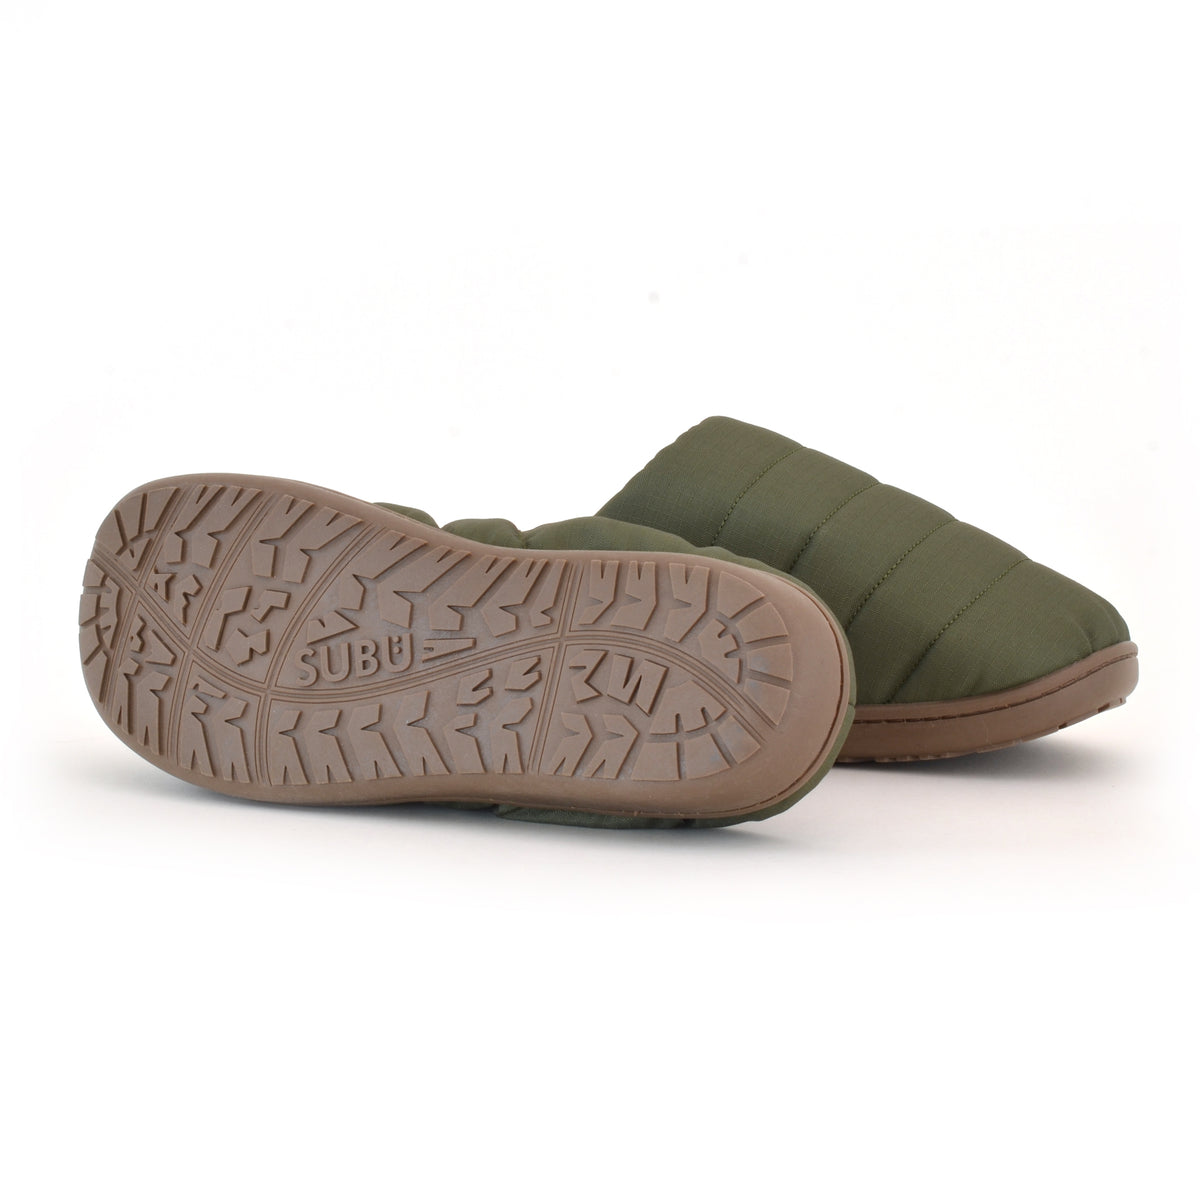 SUBU, Nannen Outdoor Slippers Olive Drab, Size, 1, Slippers,